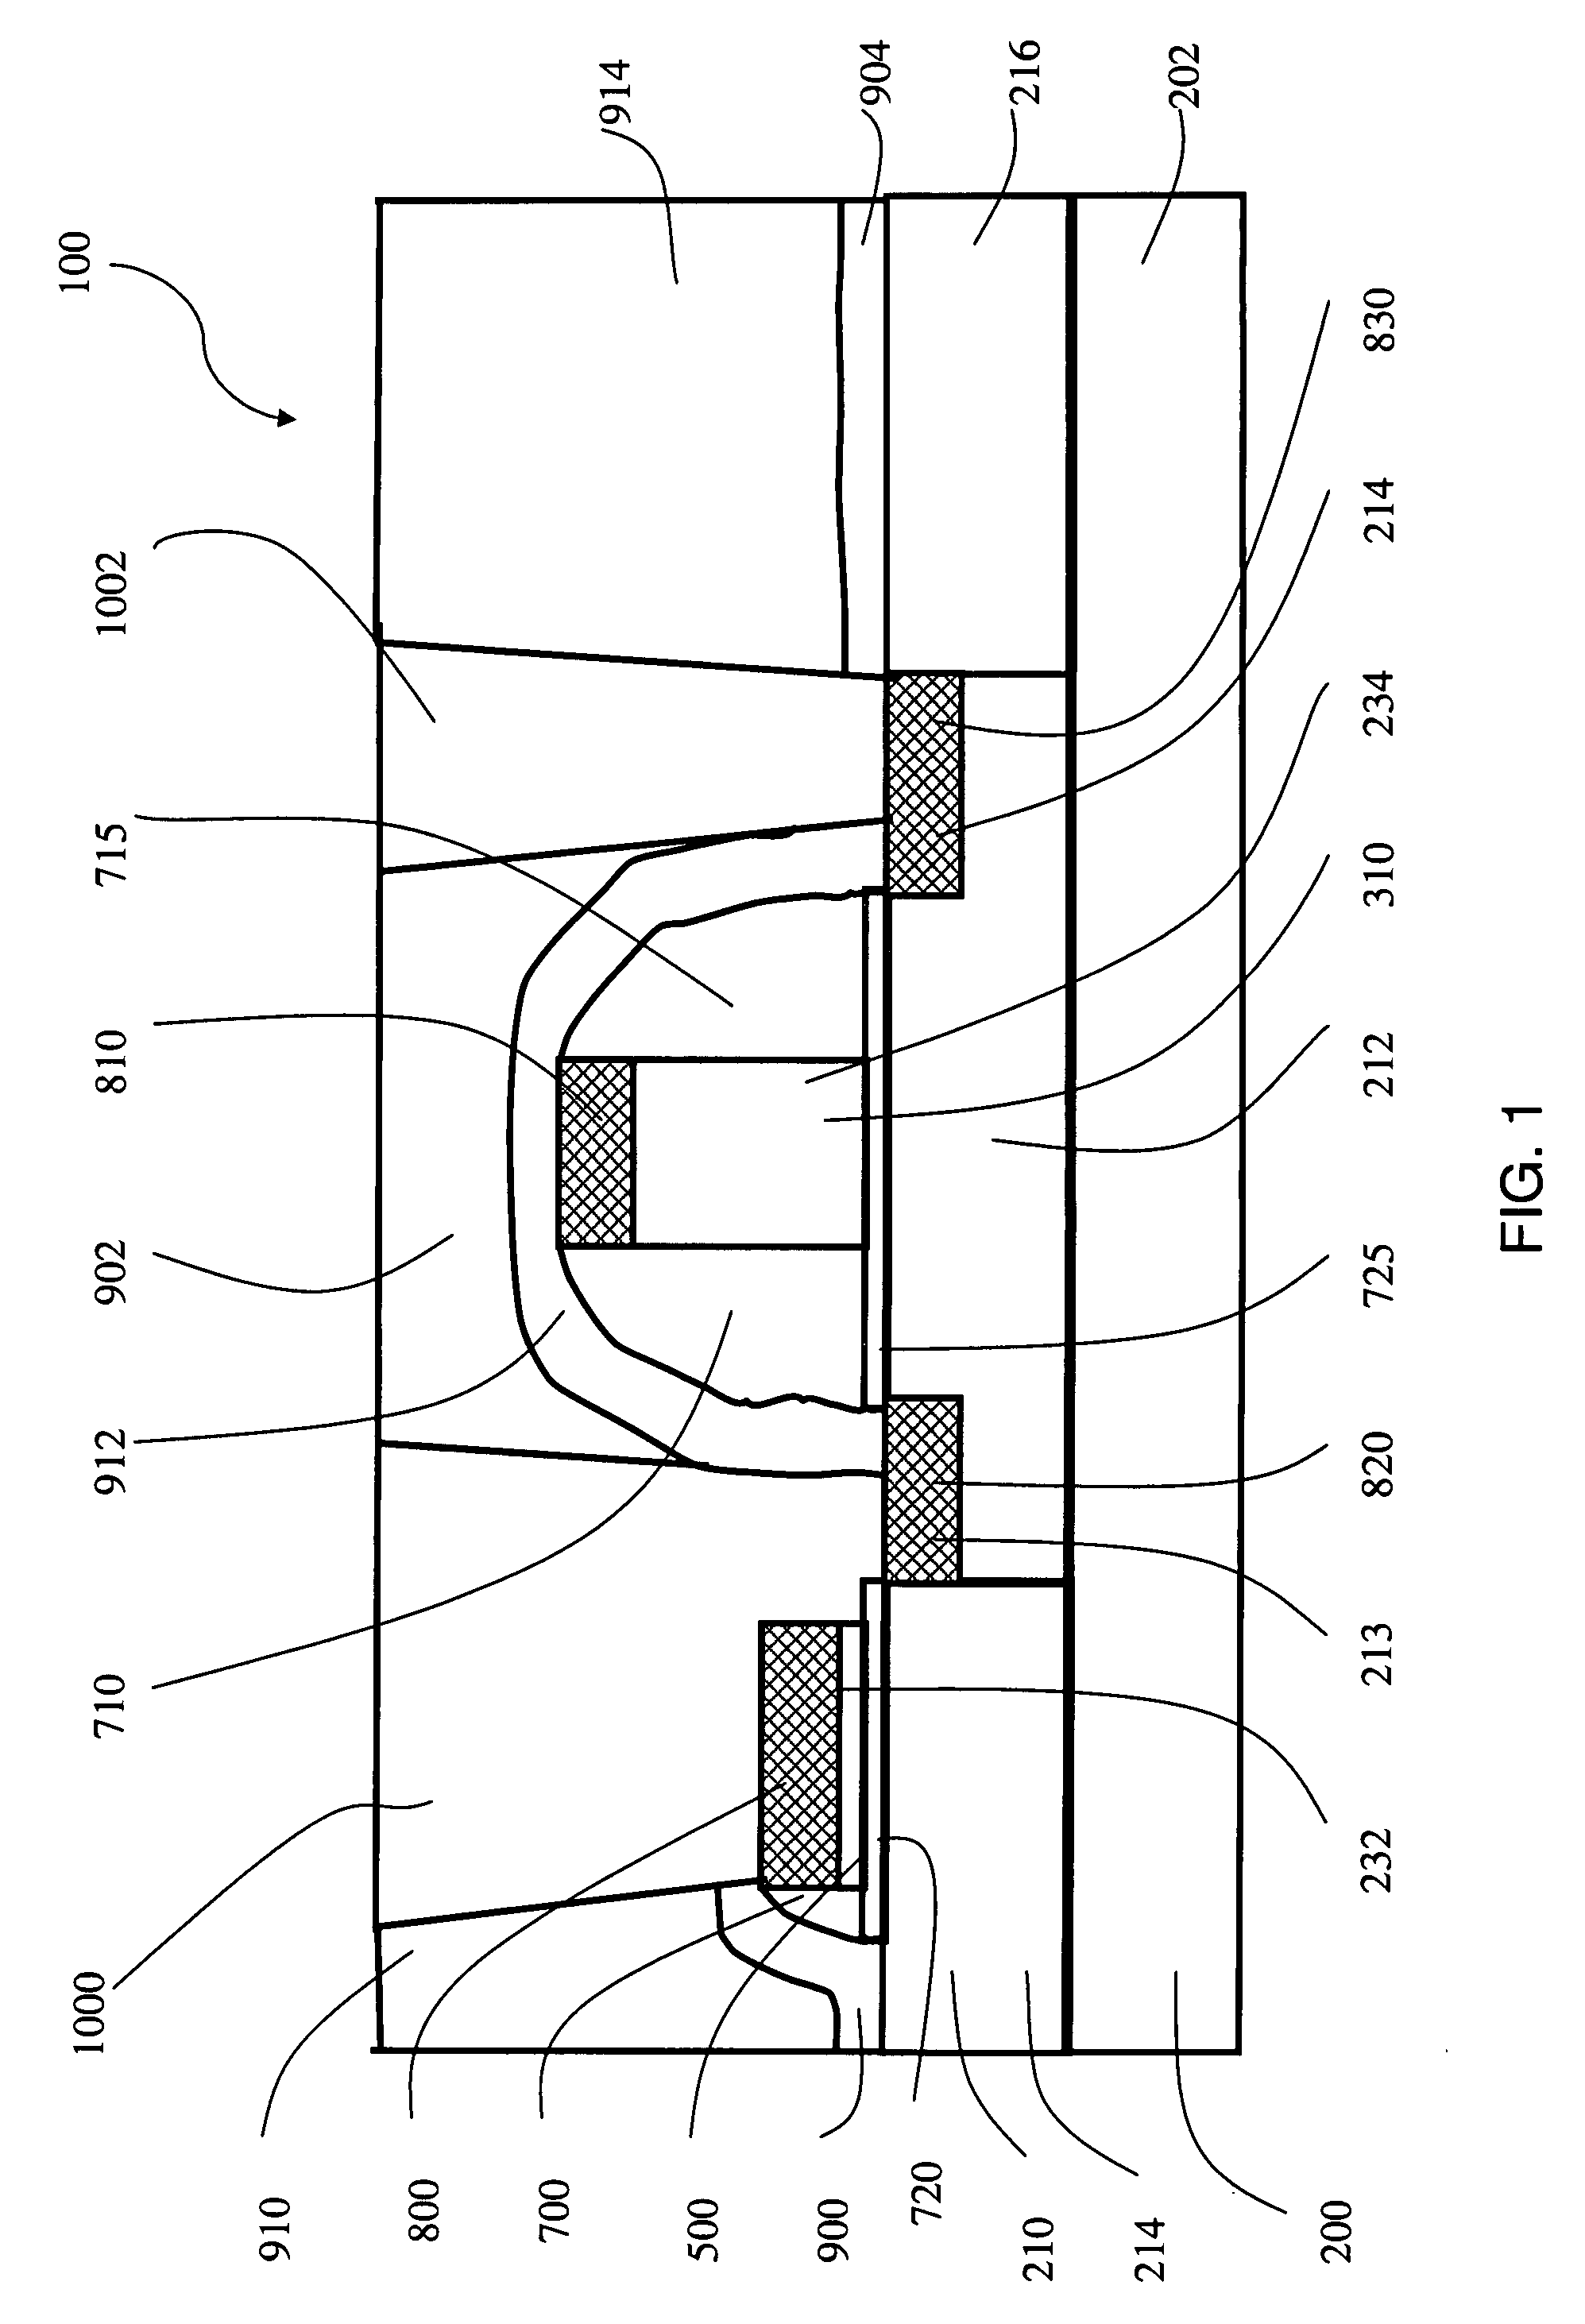 Structure and method for making high density mosfet circuits with different height contact lines